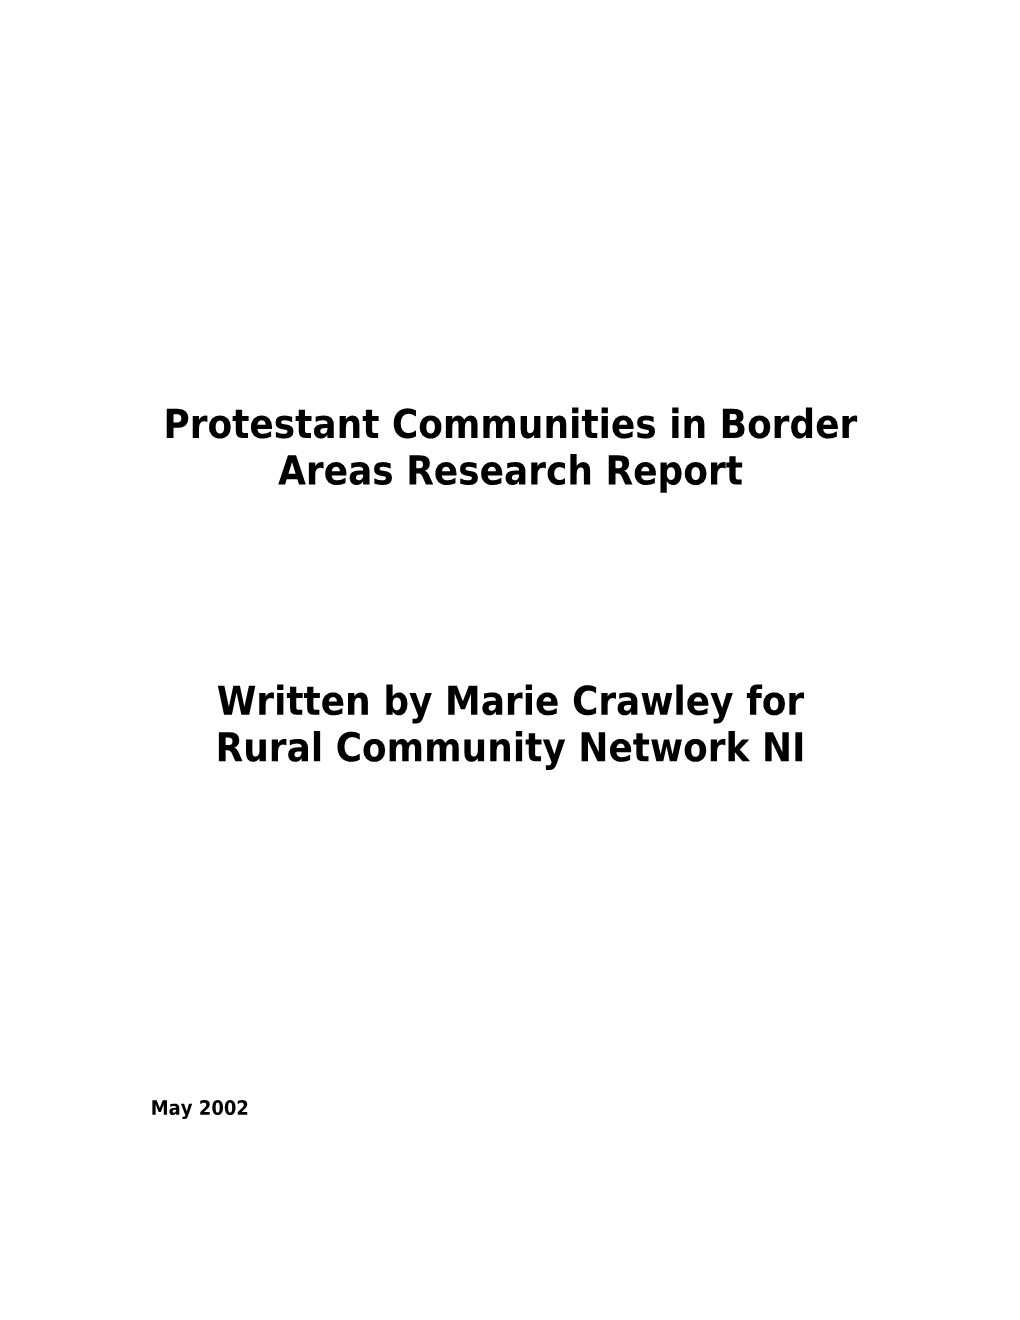 Research Work with Protestant Communities in Border Areas